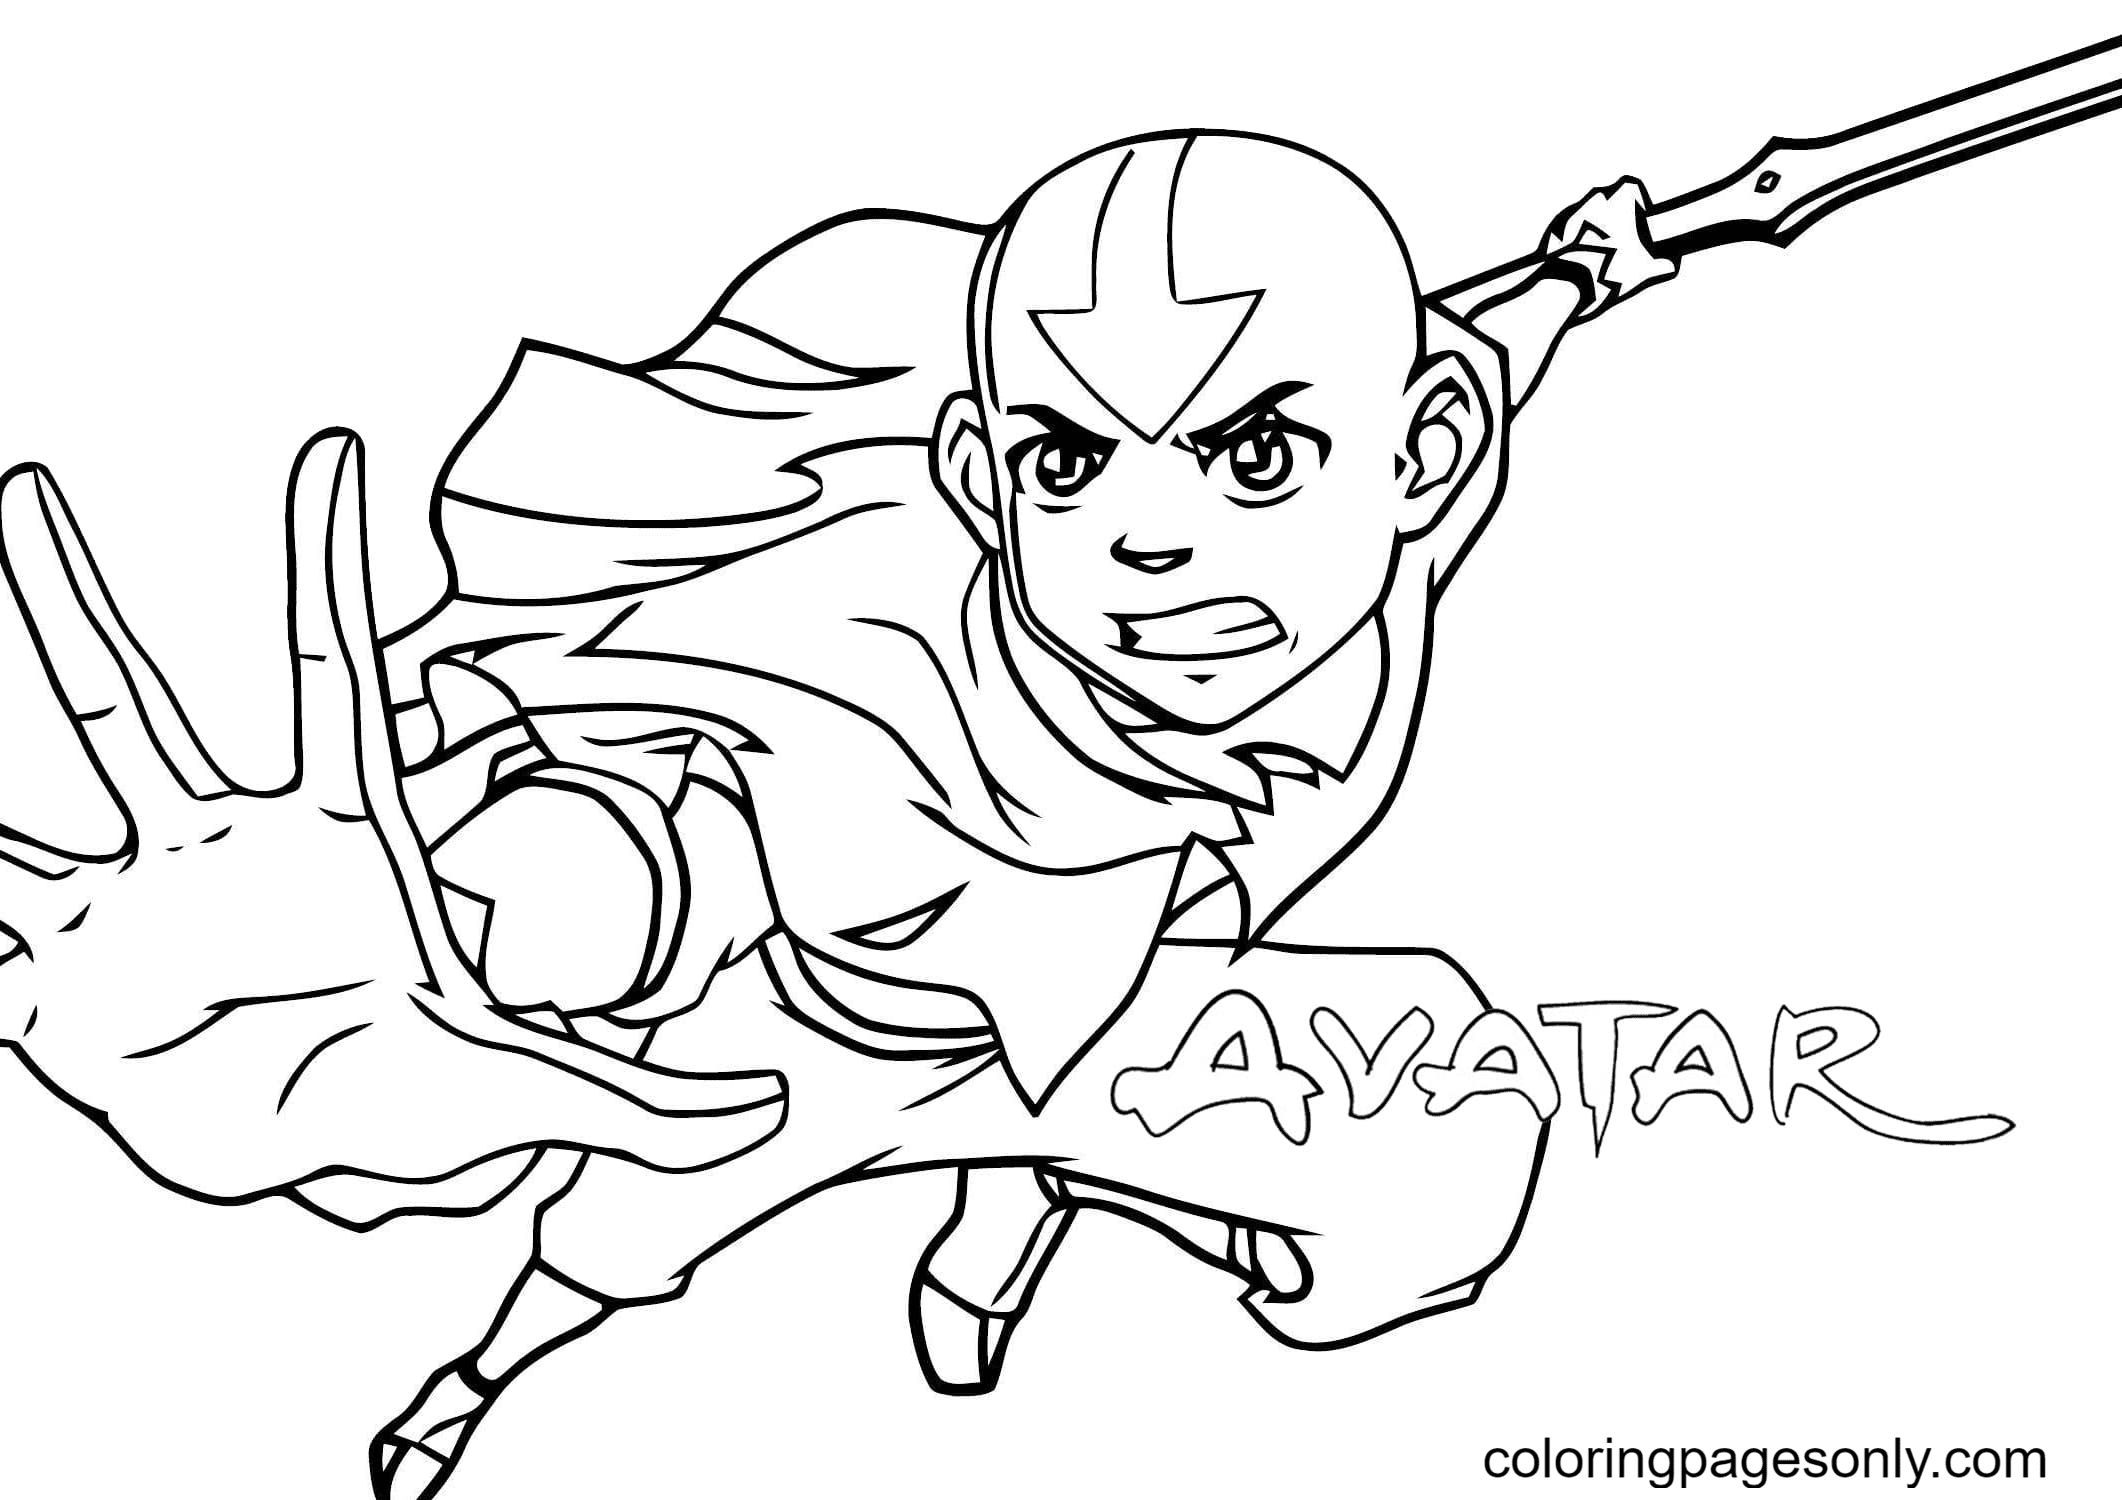 Boy Aang, ruler of all elements Coloring Page